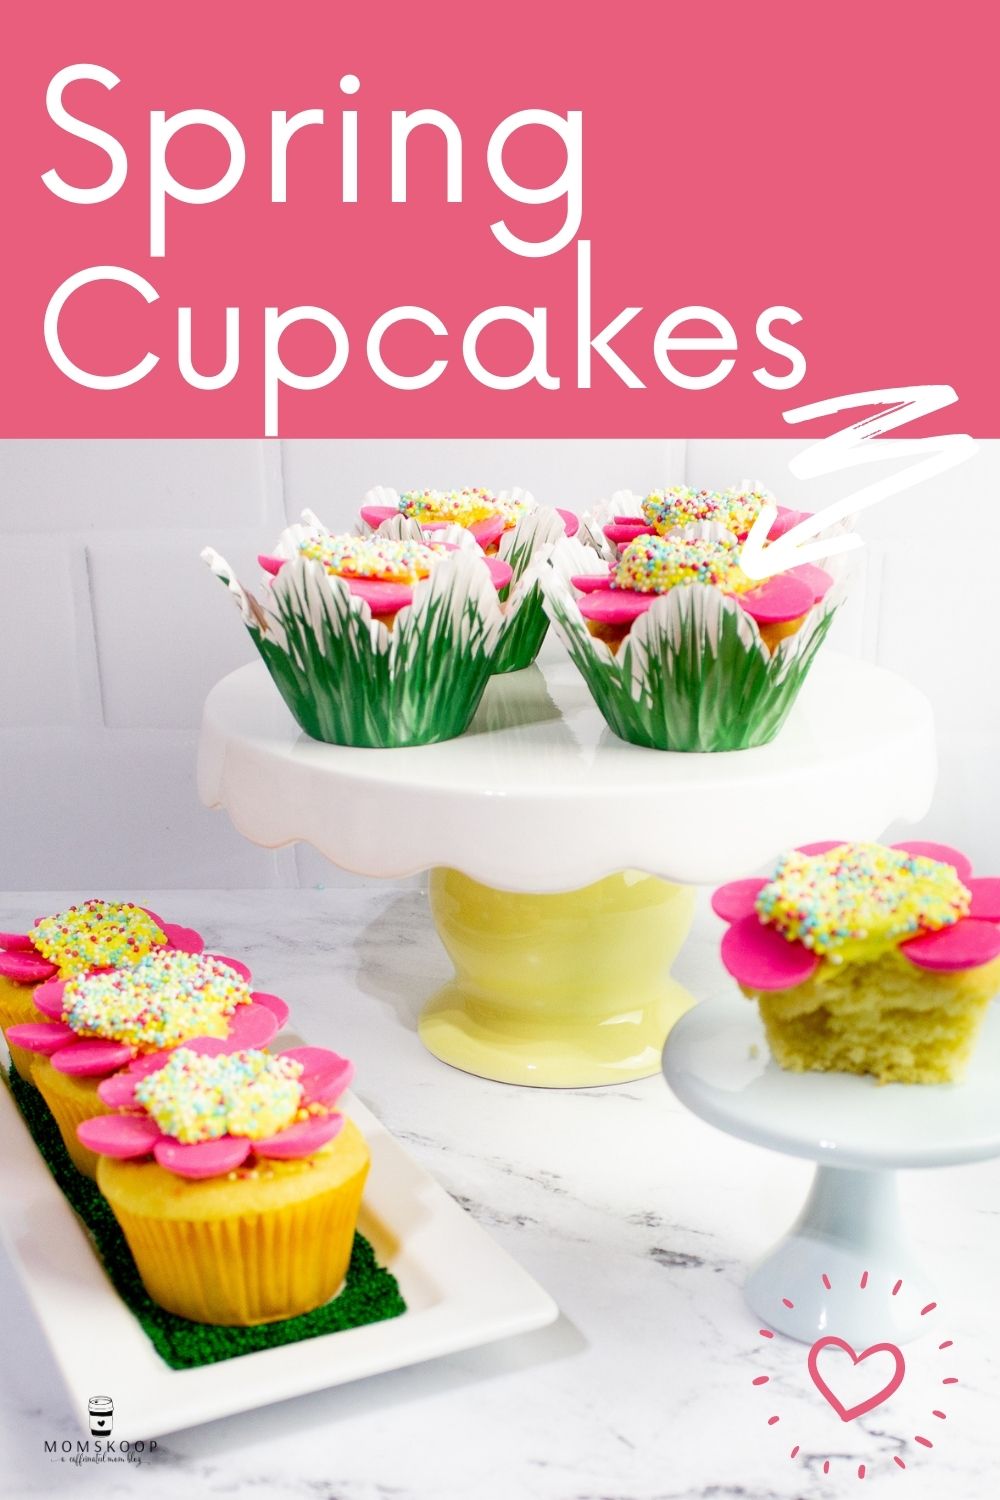 How to Make Spring Daisy Cupcakes